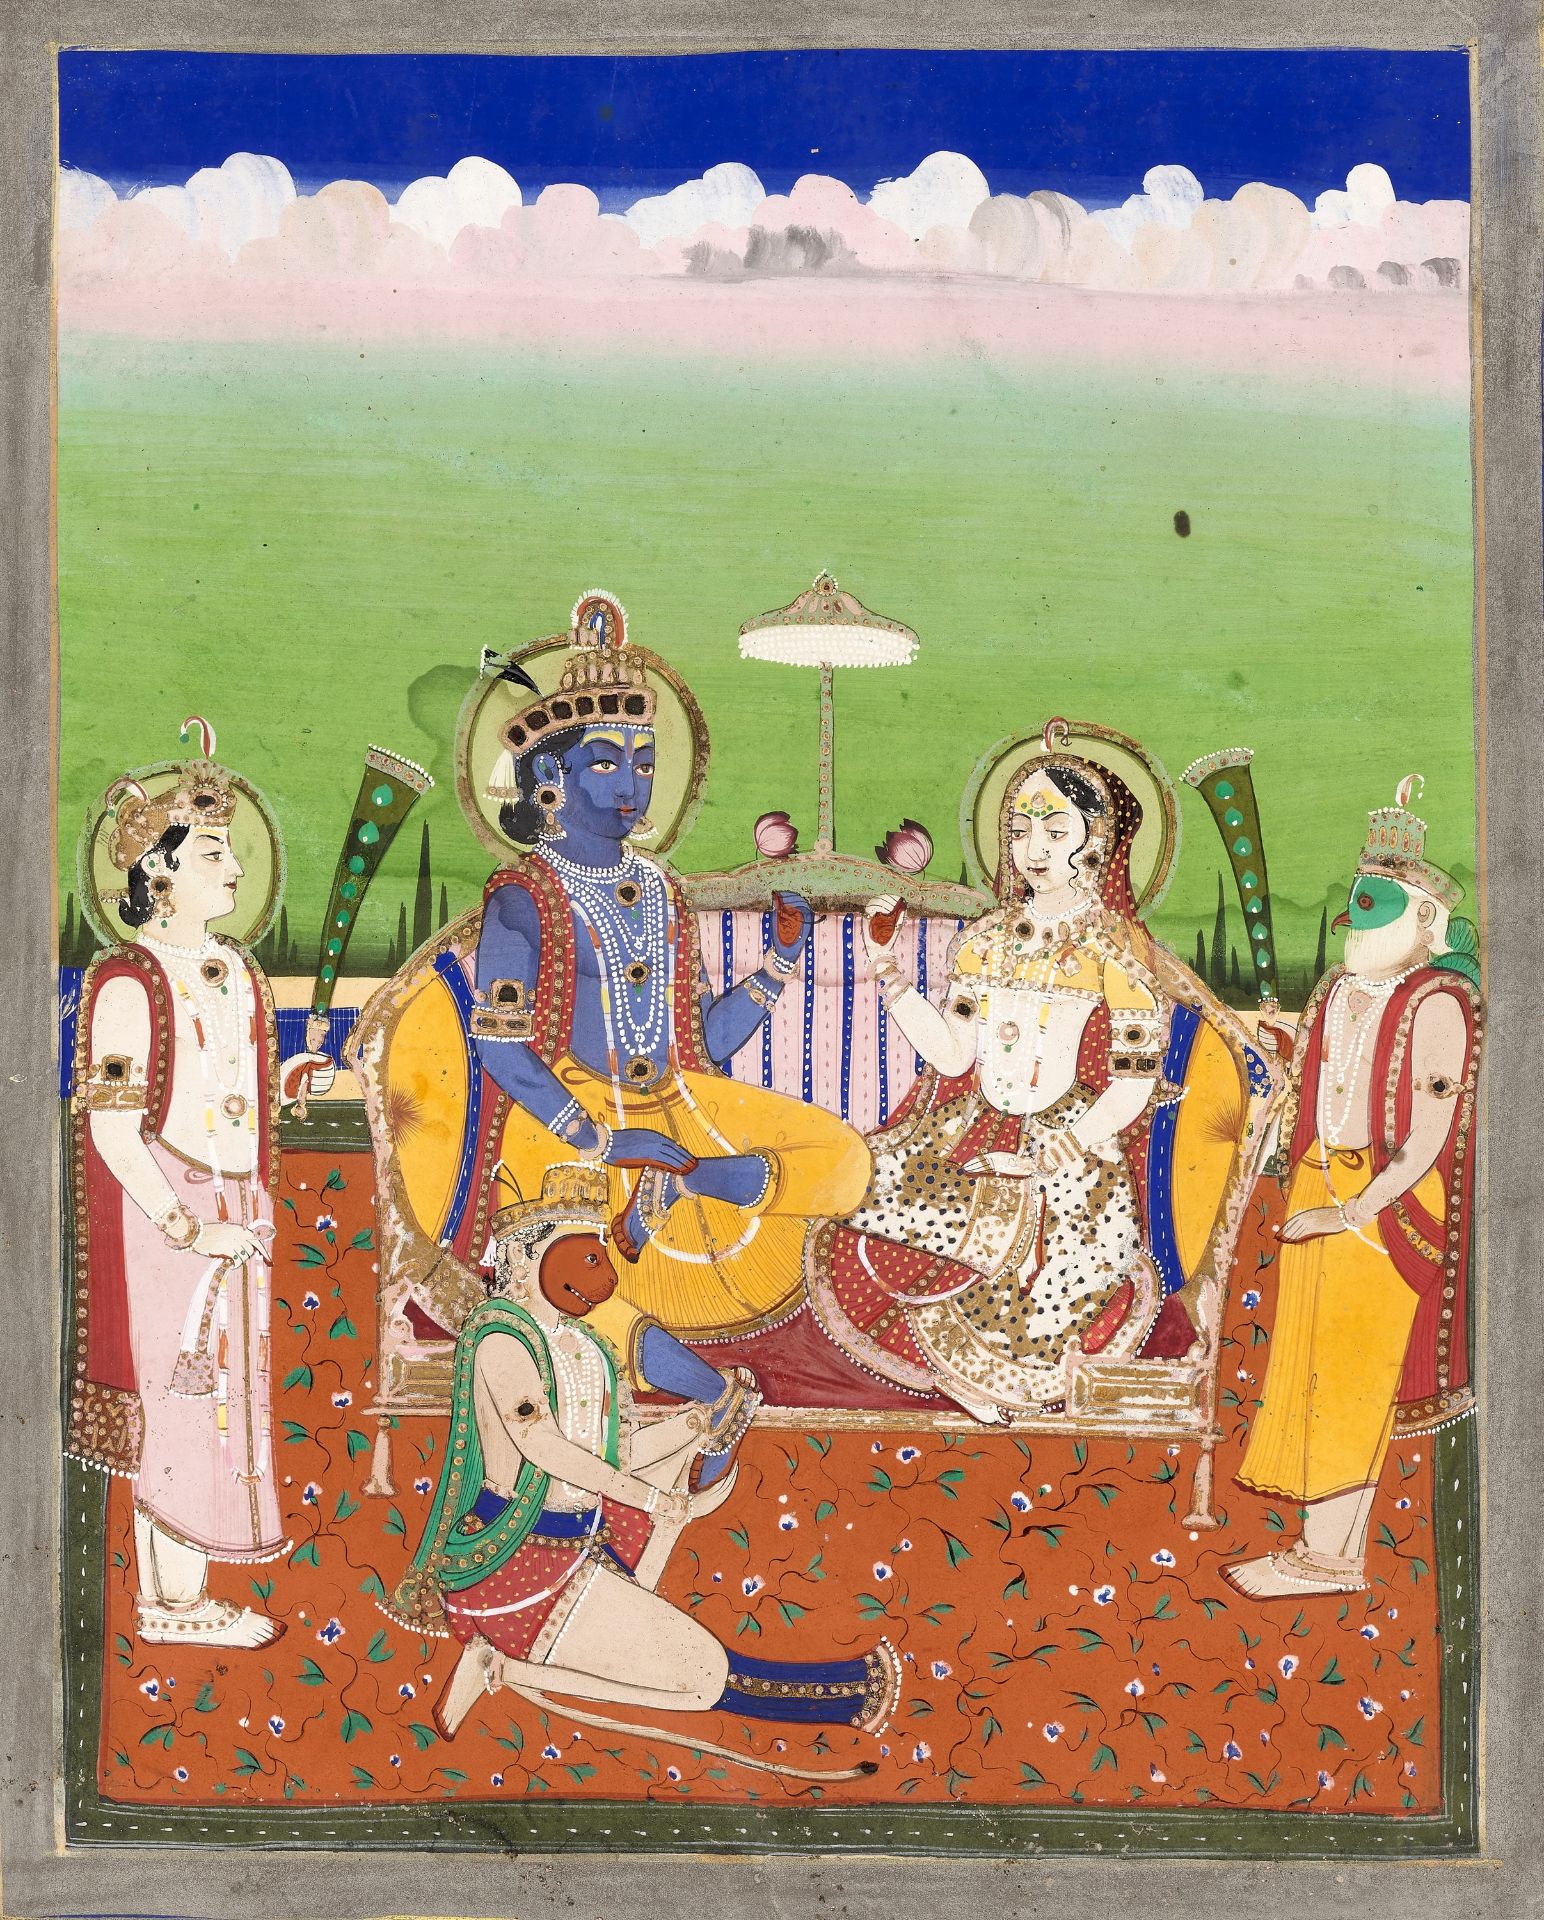 AN INDIAN MINIATURE PAINTING OF RAMA AND SITA ENTHRONED